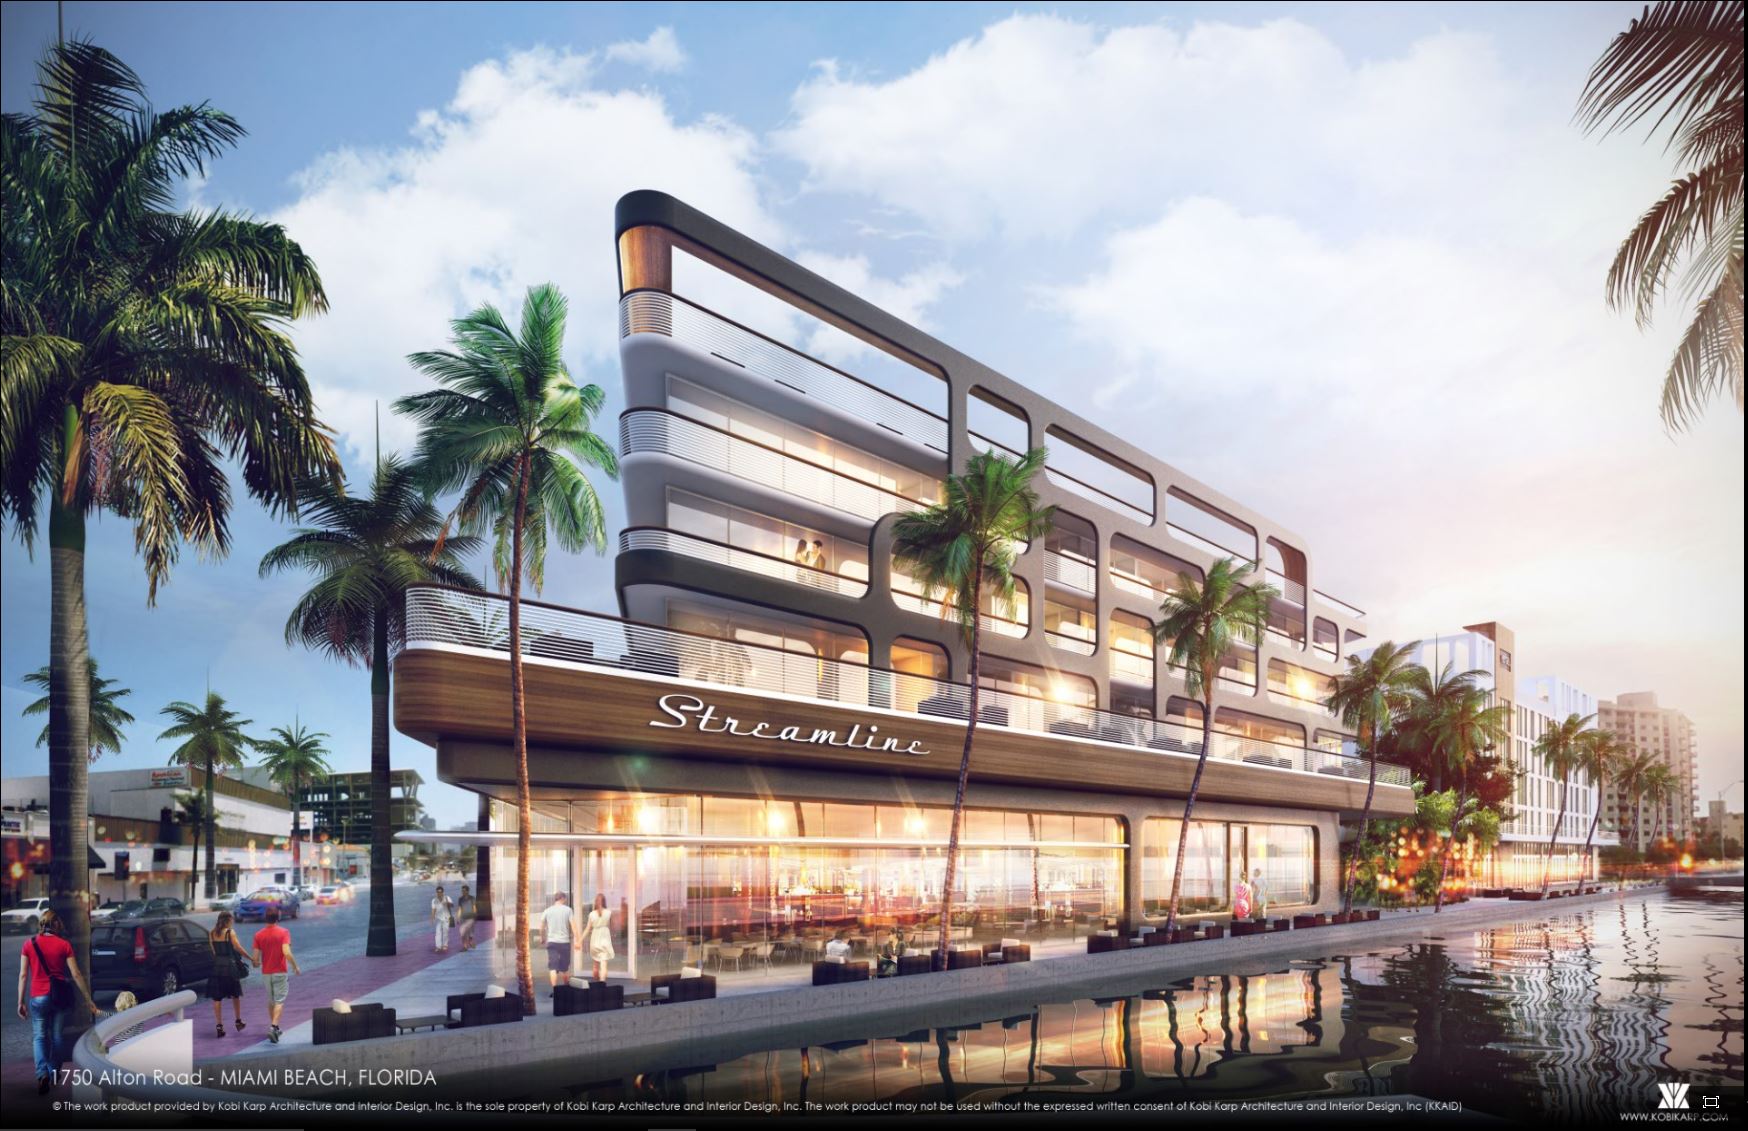 Construction Loan Paves Way for New Alton Road Hotel